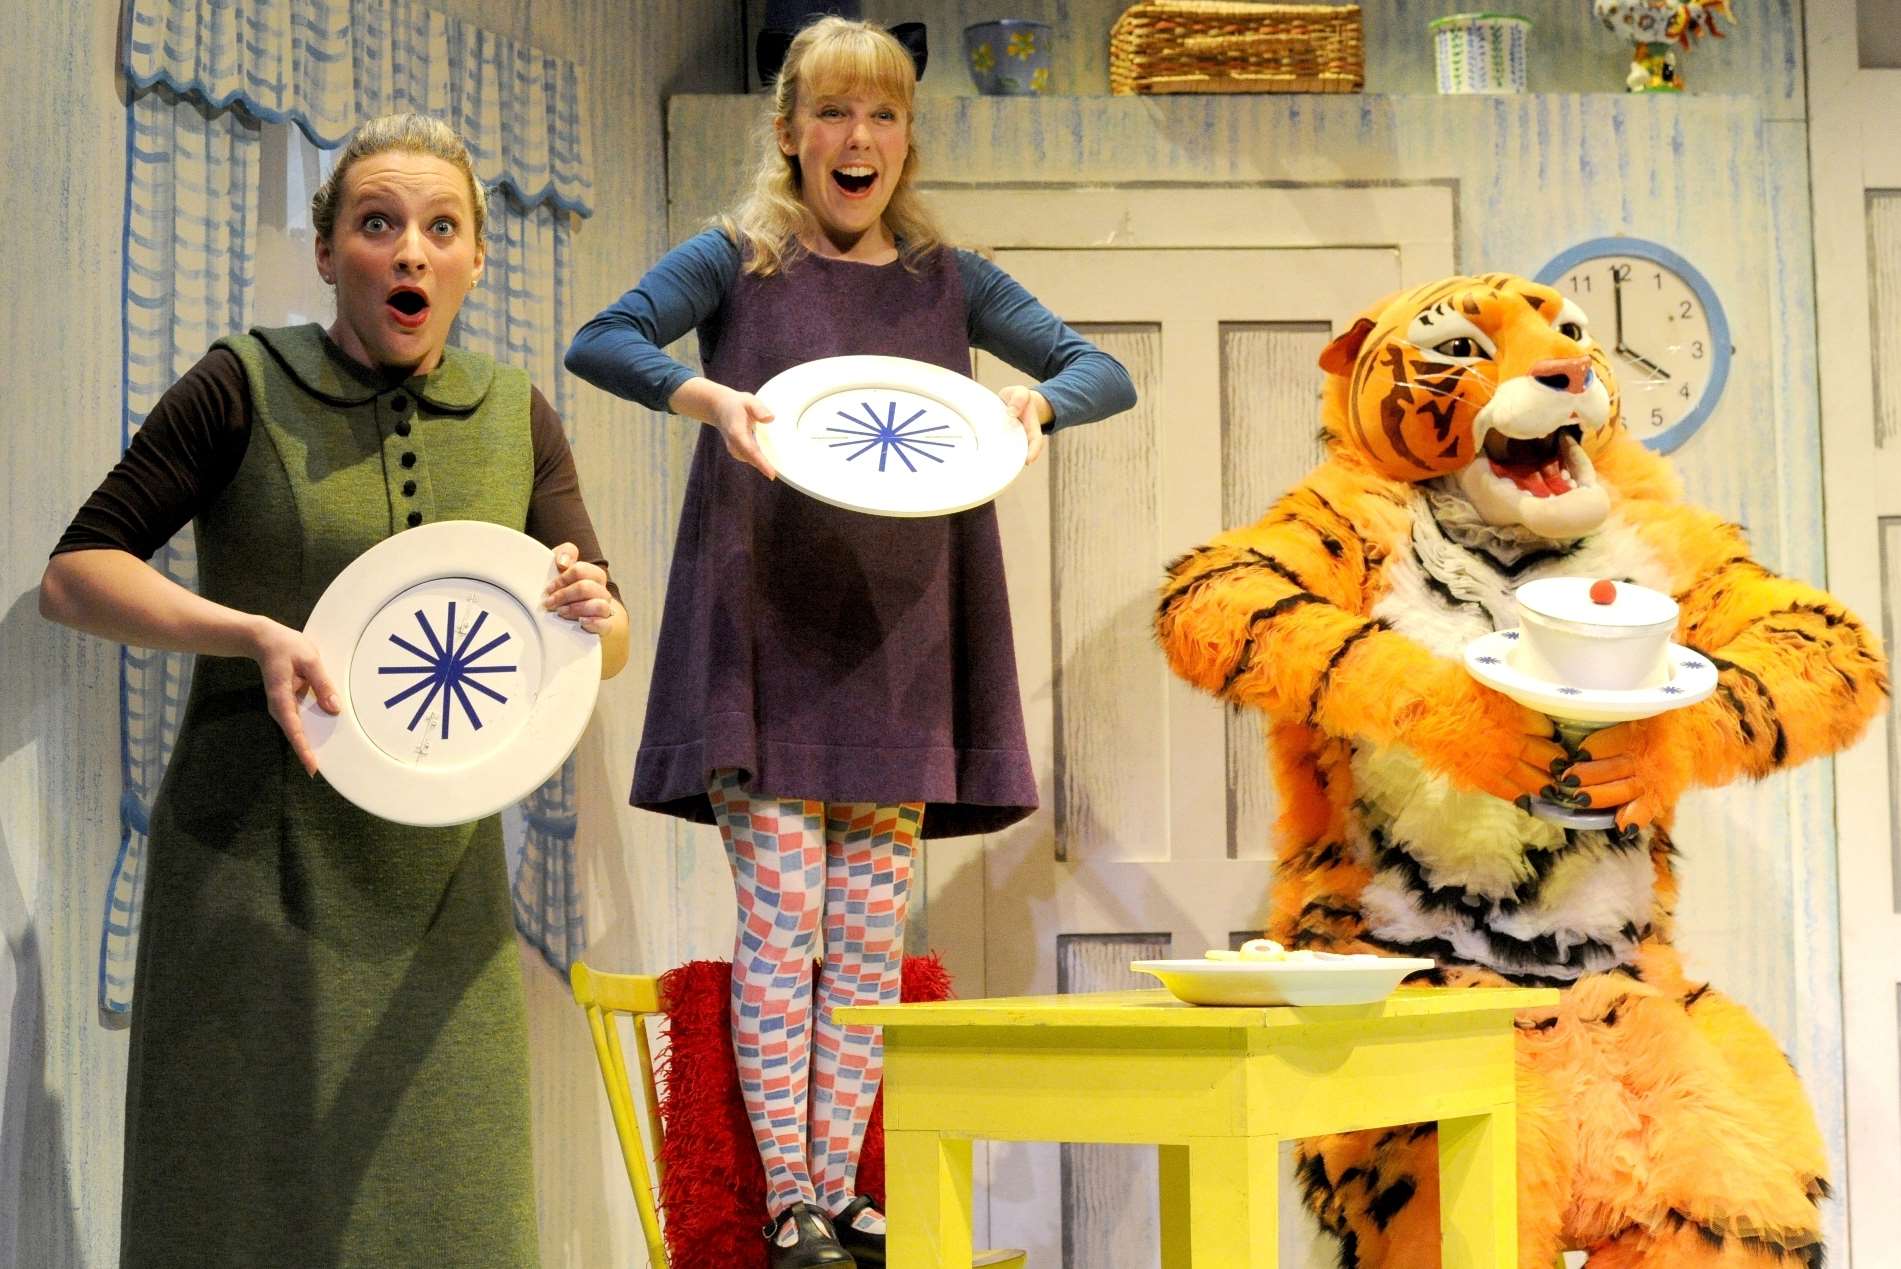 Sophie and her mum are shocked by the appetite of the Tiger Who Came To Tea